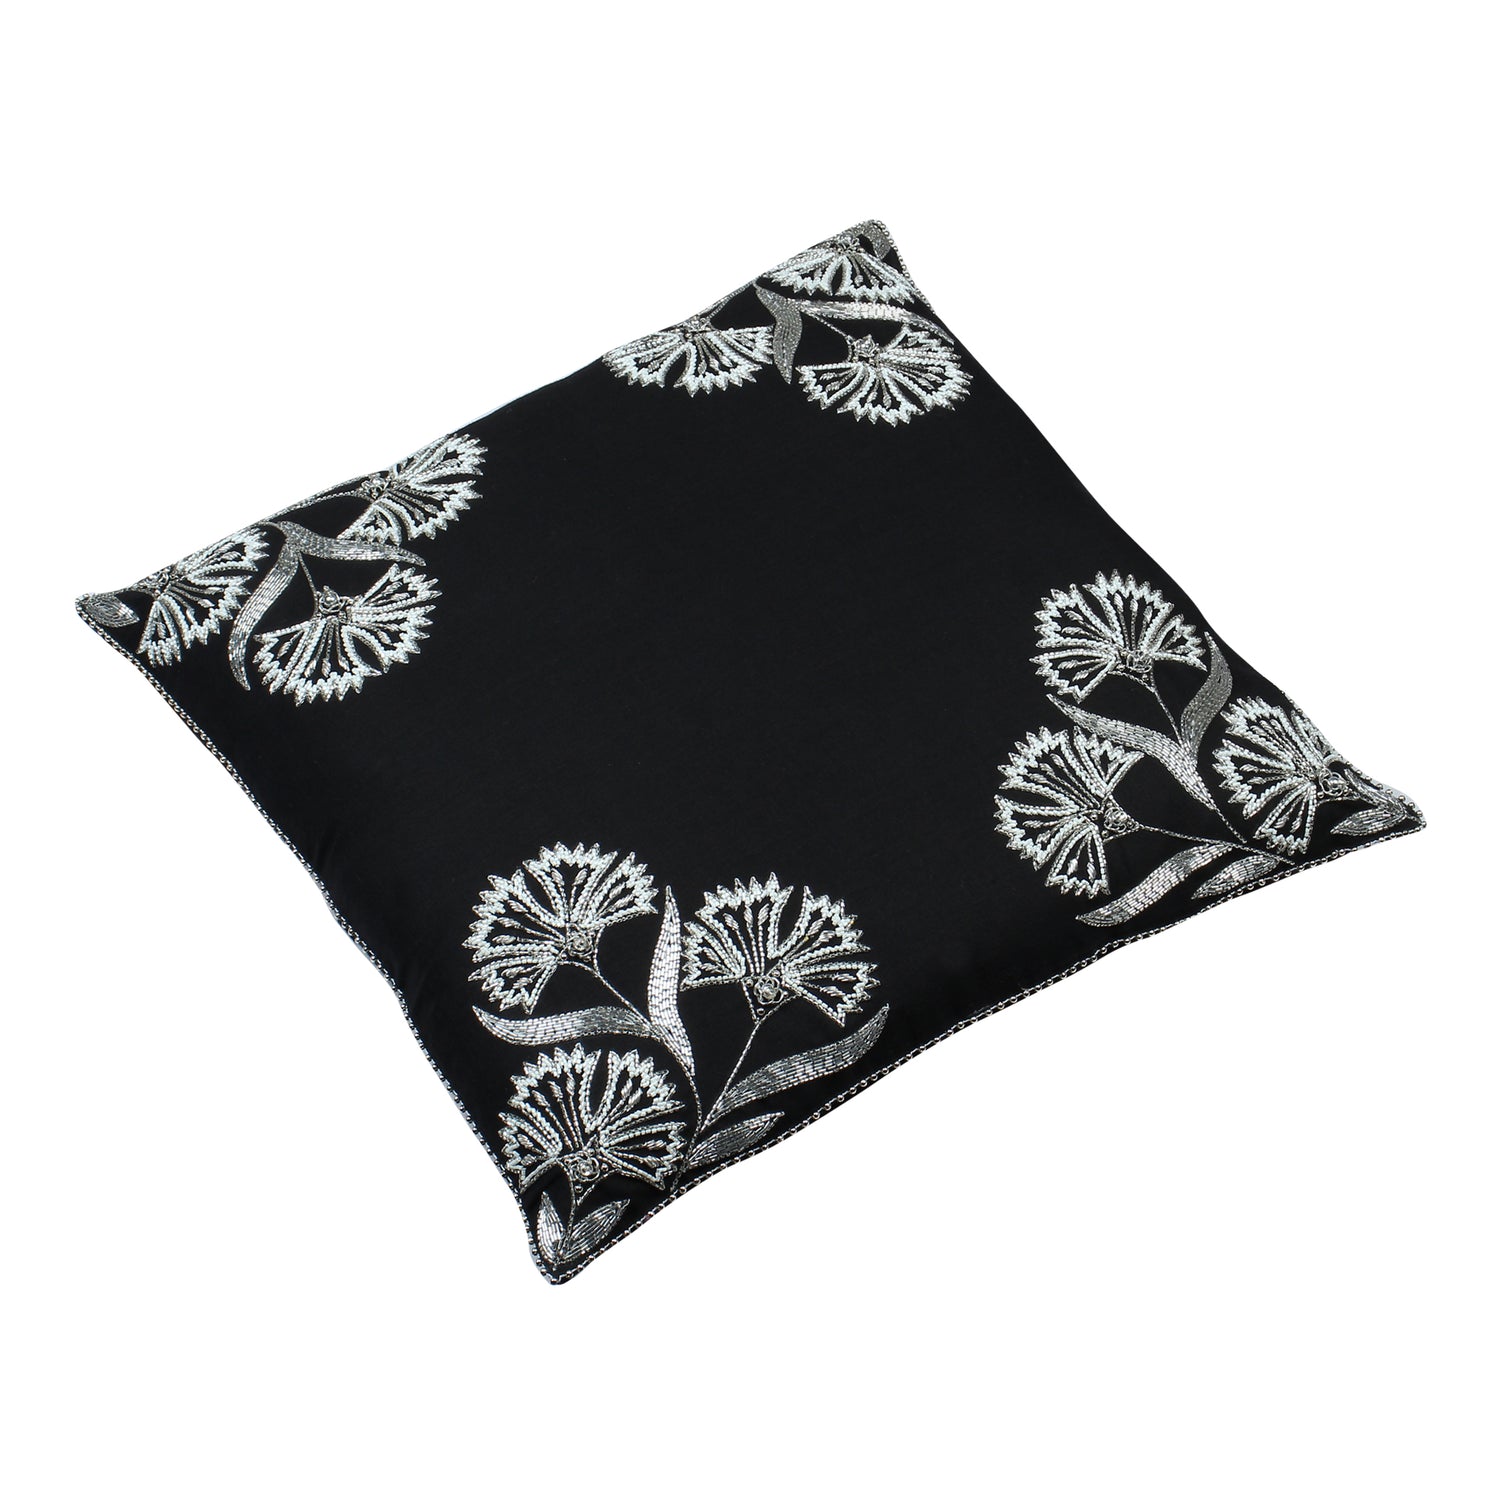 cushion covers online shopping 